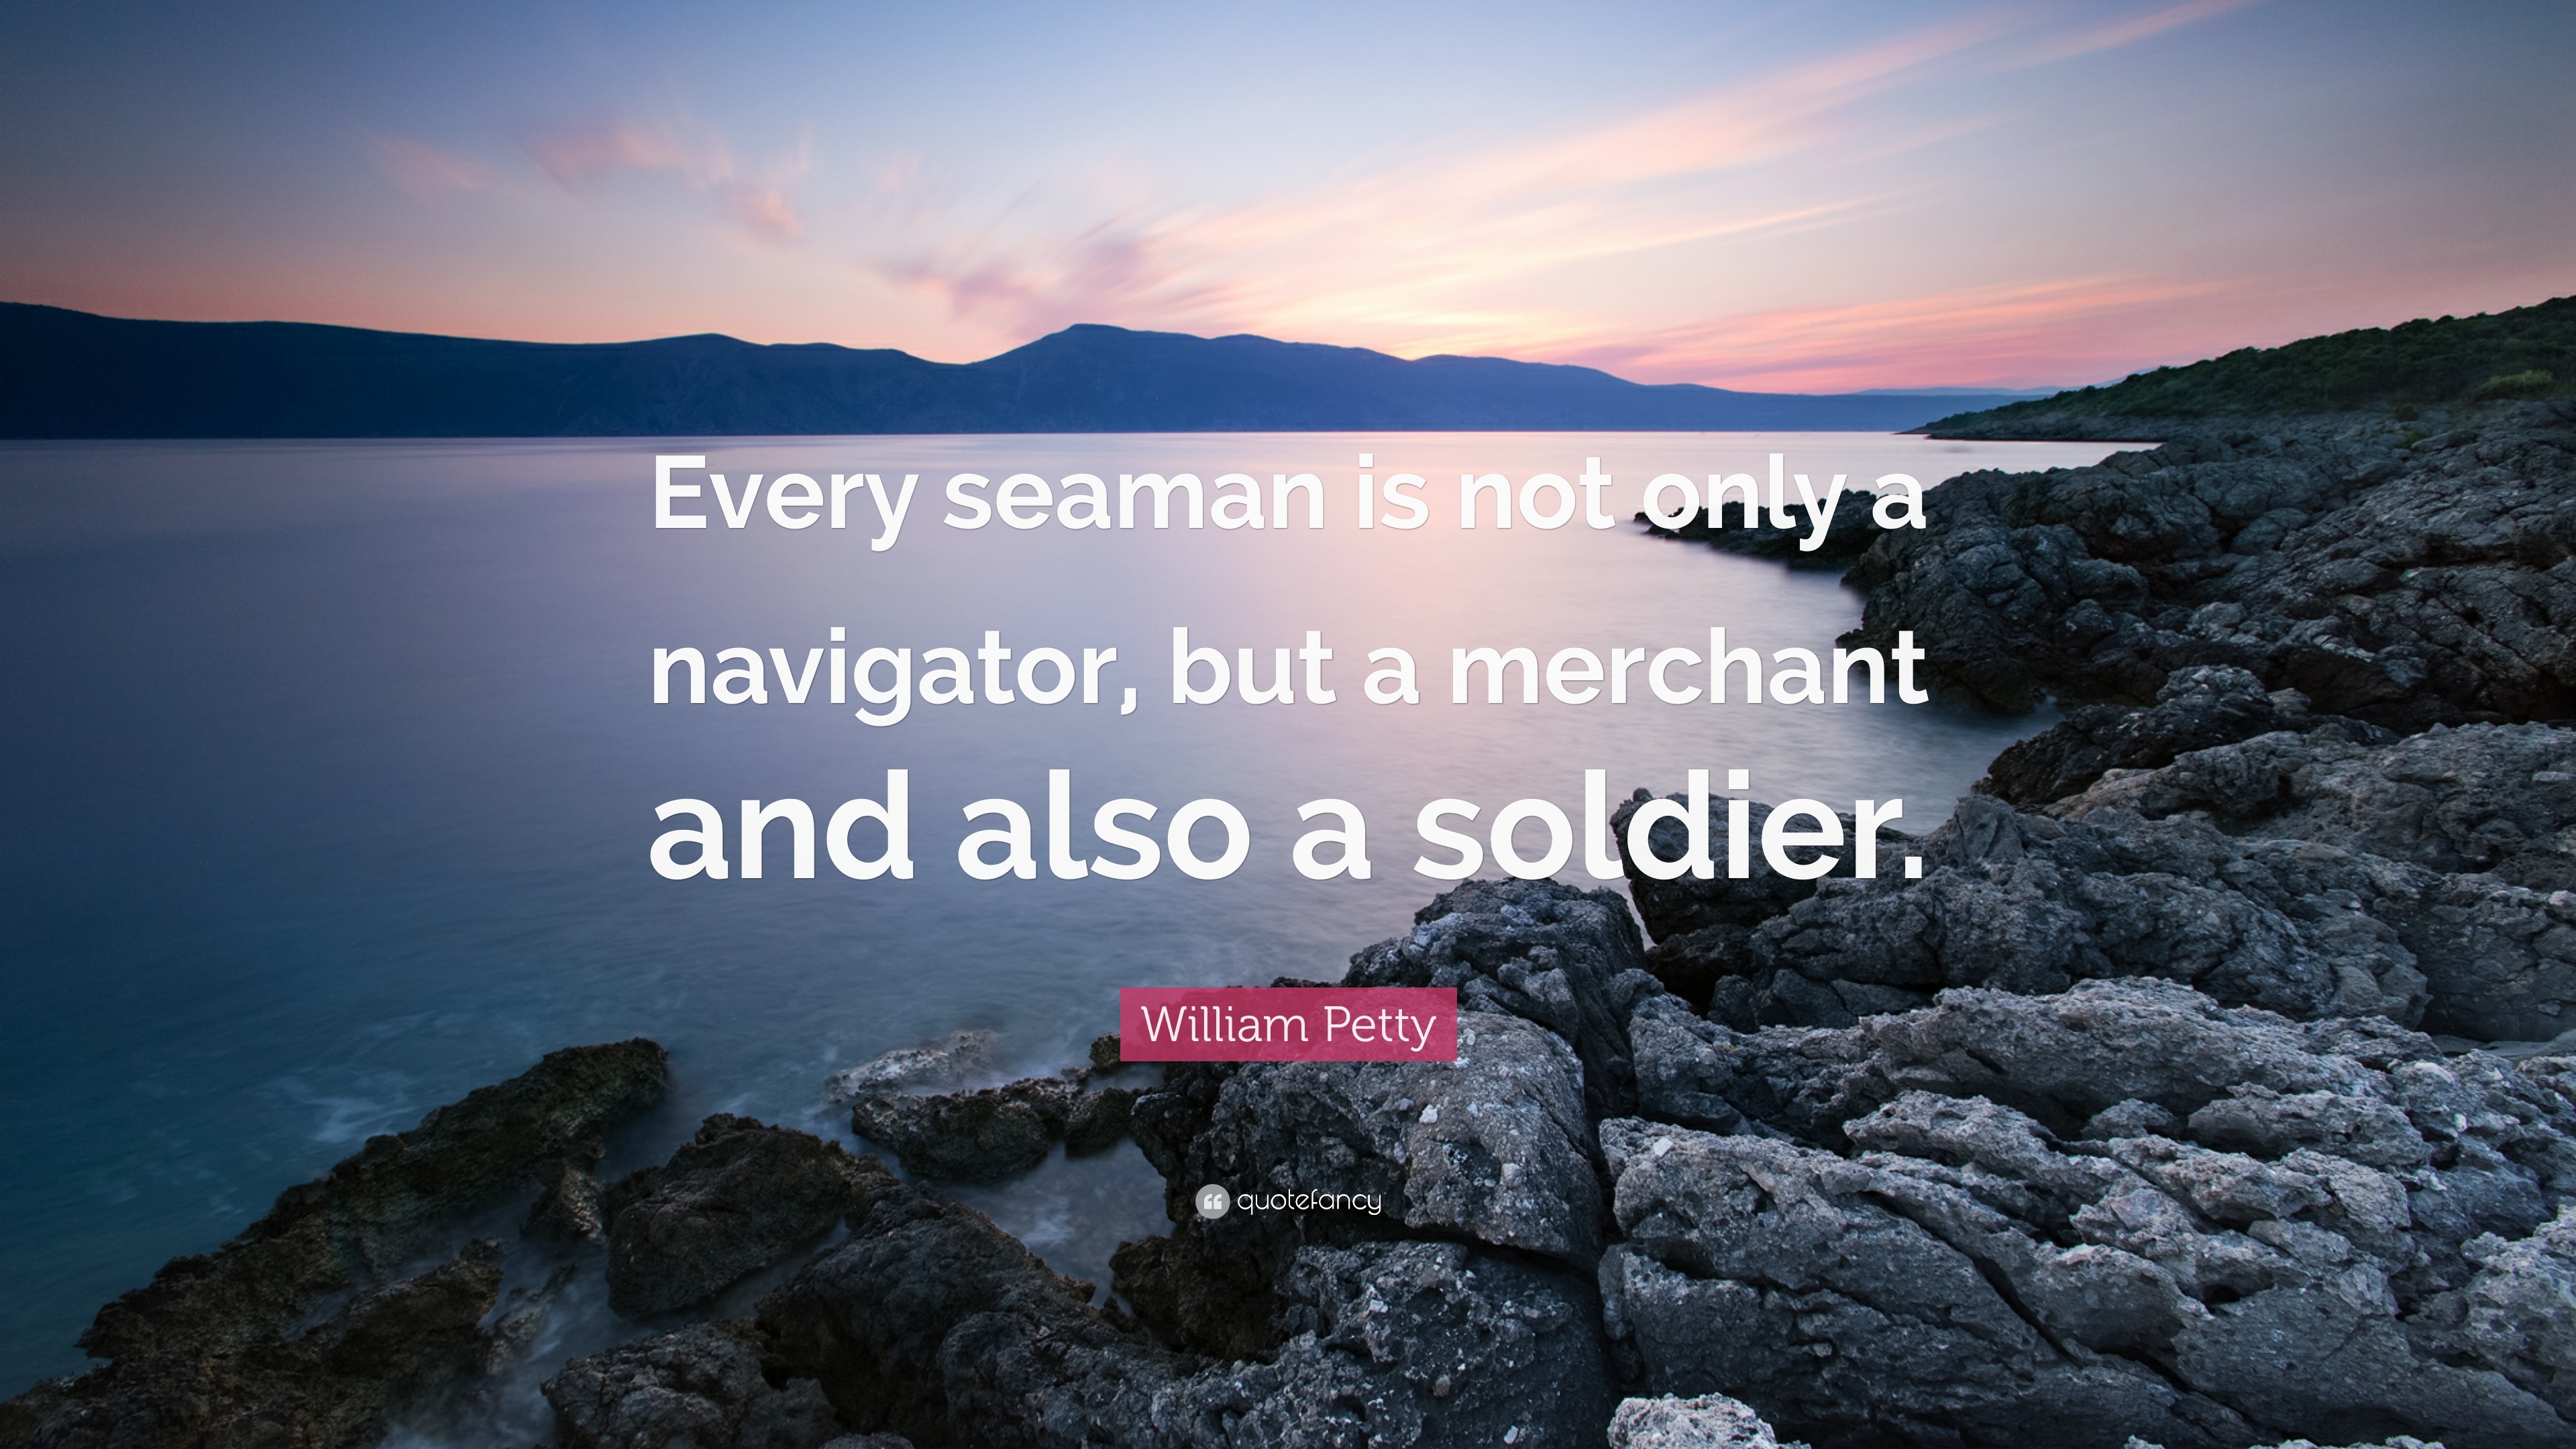 William Petty Quote: “Every seaman is not only a navigator, but a merchant  and also a